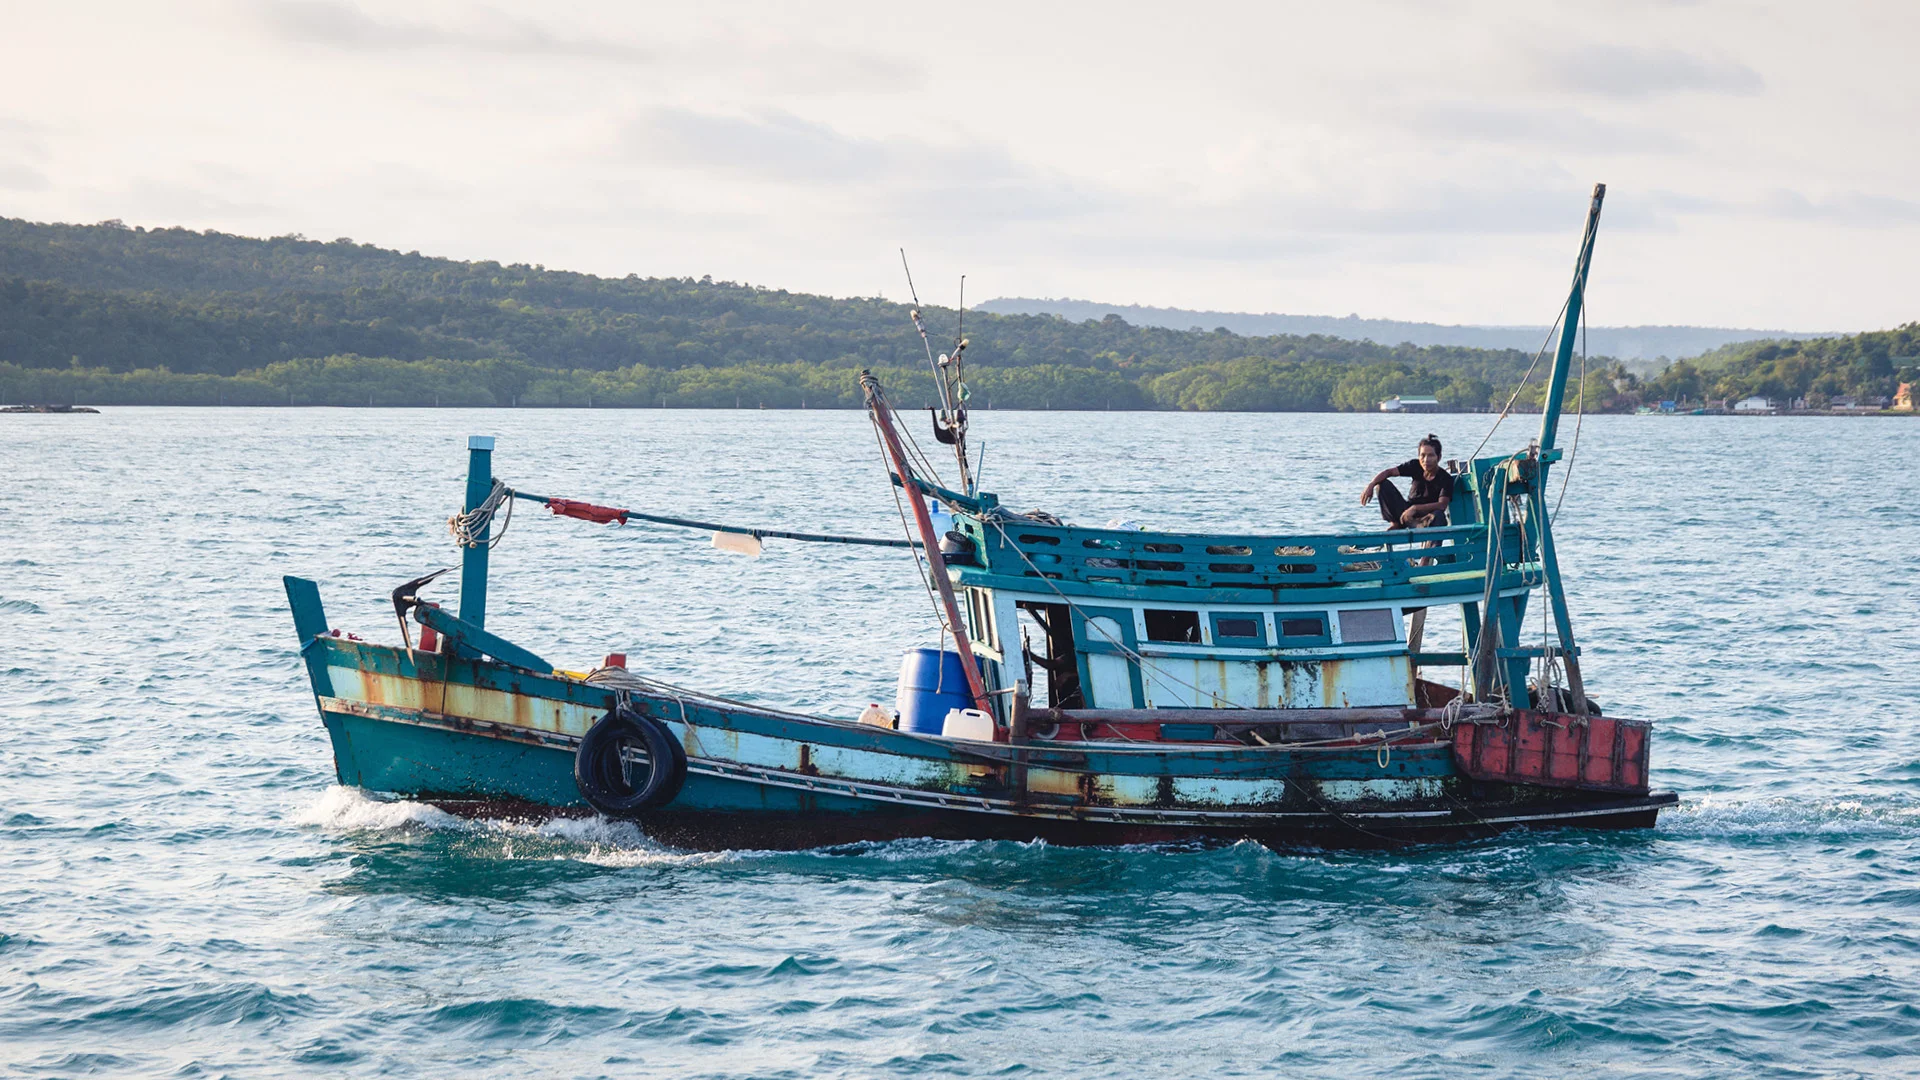 Fisher man on his boat in the Gulf of Thailand, Koh Rong Sanloem